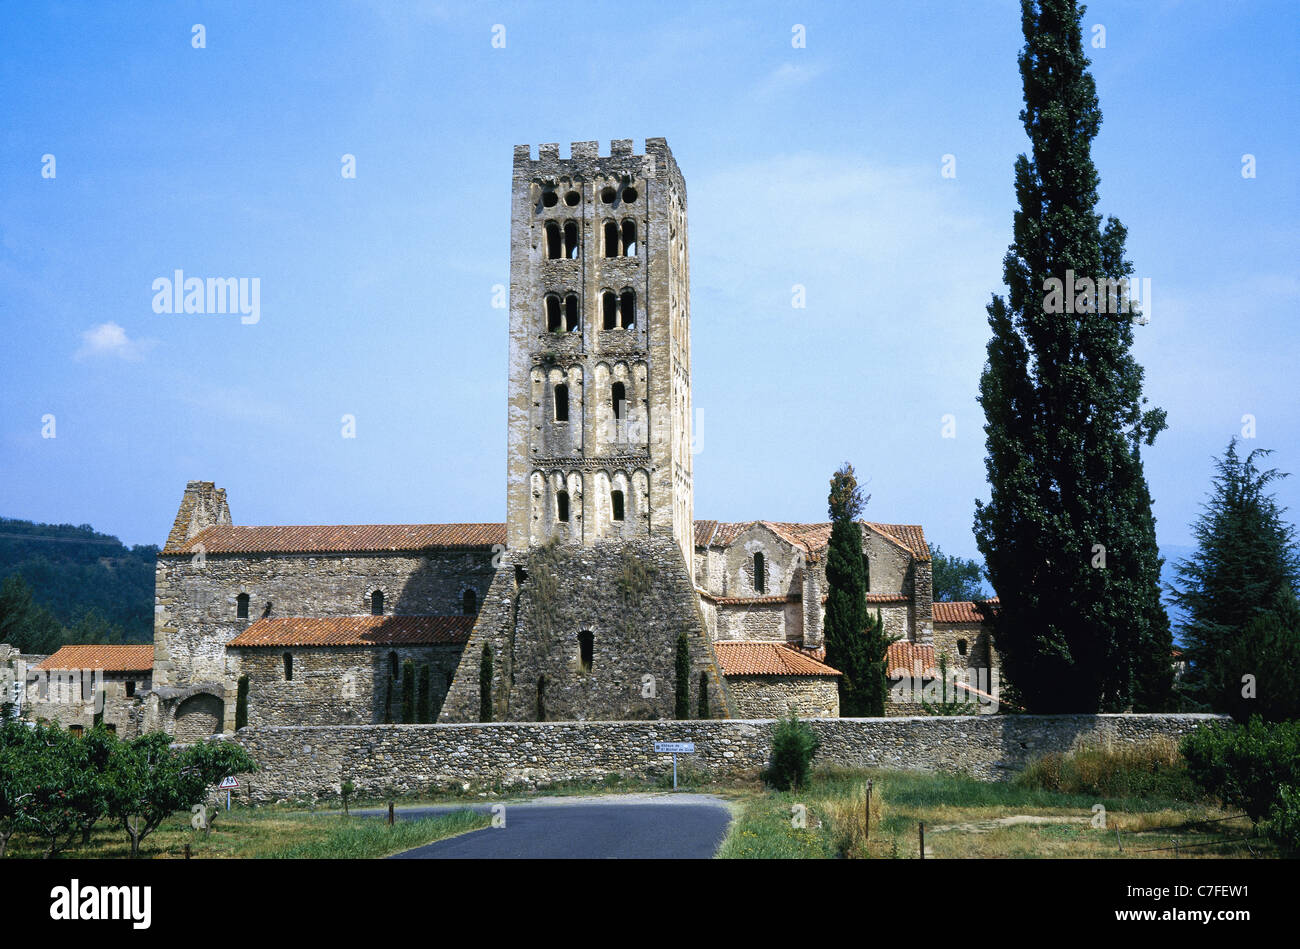 France. Abbey of Saint-Michel-de-Cuxa. Romanesque bell tower. Lombard style. Stock Photo